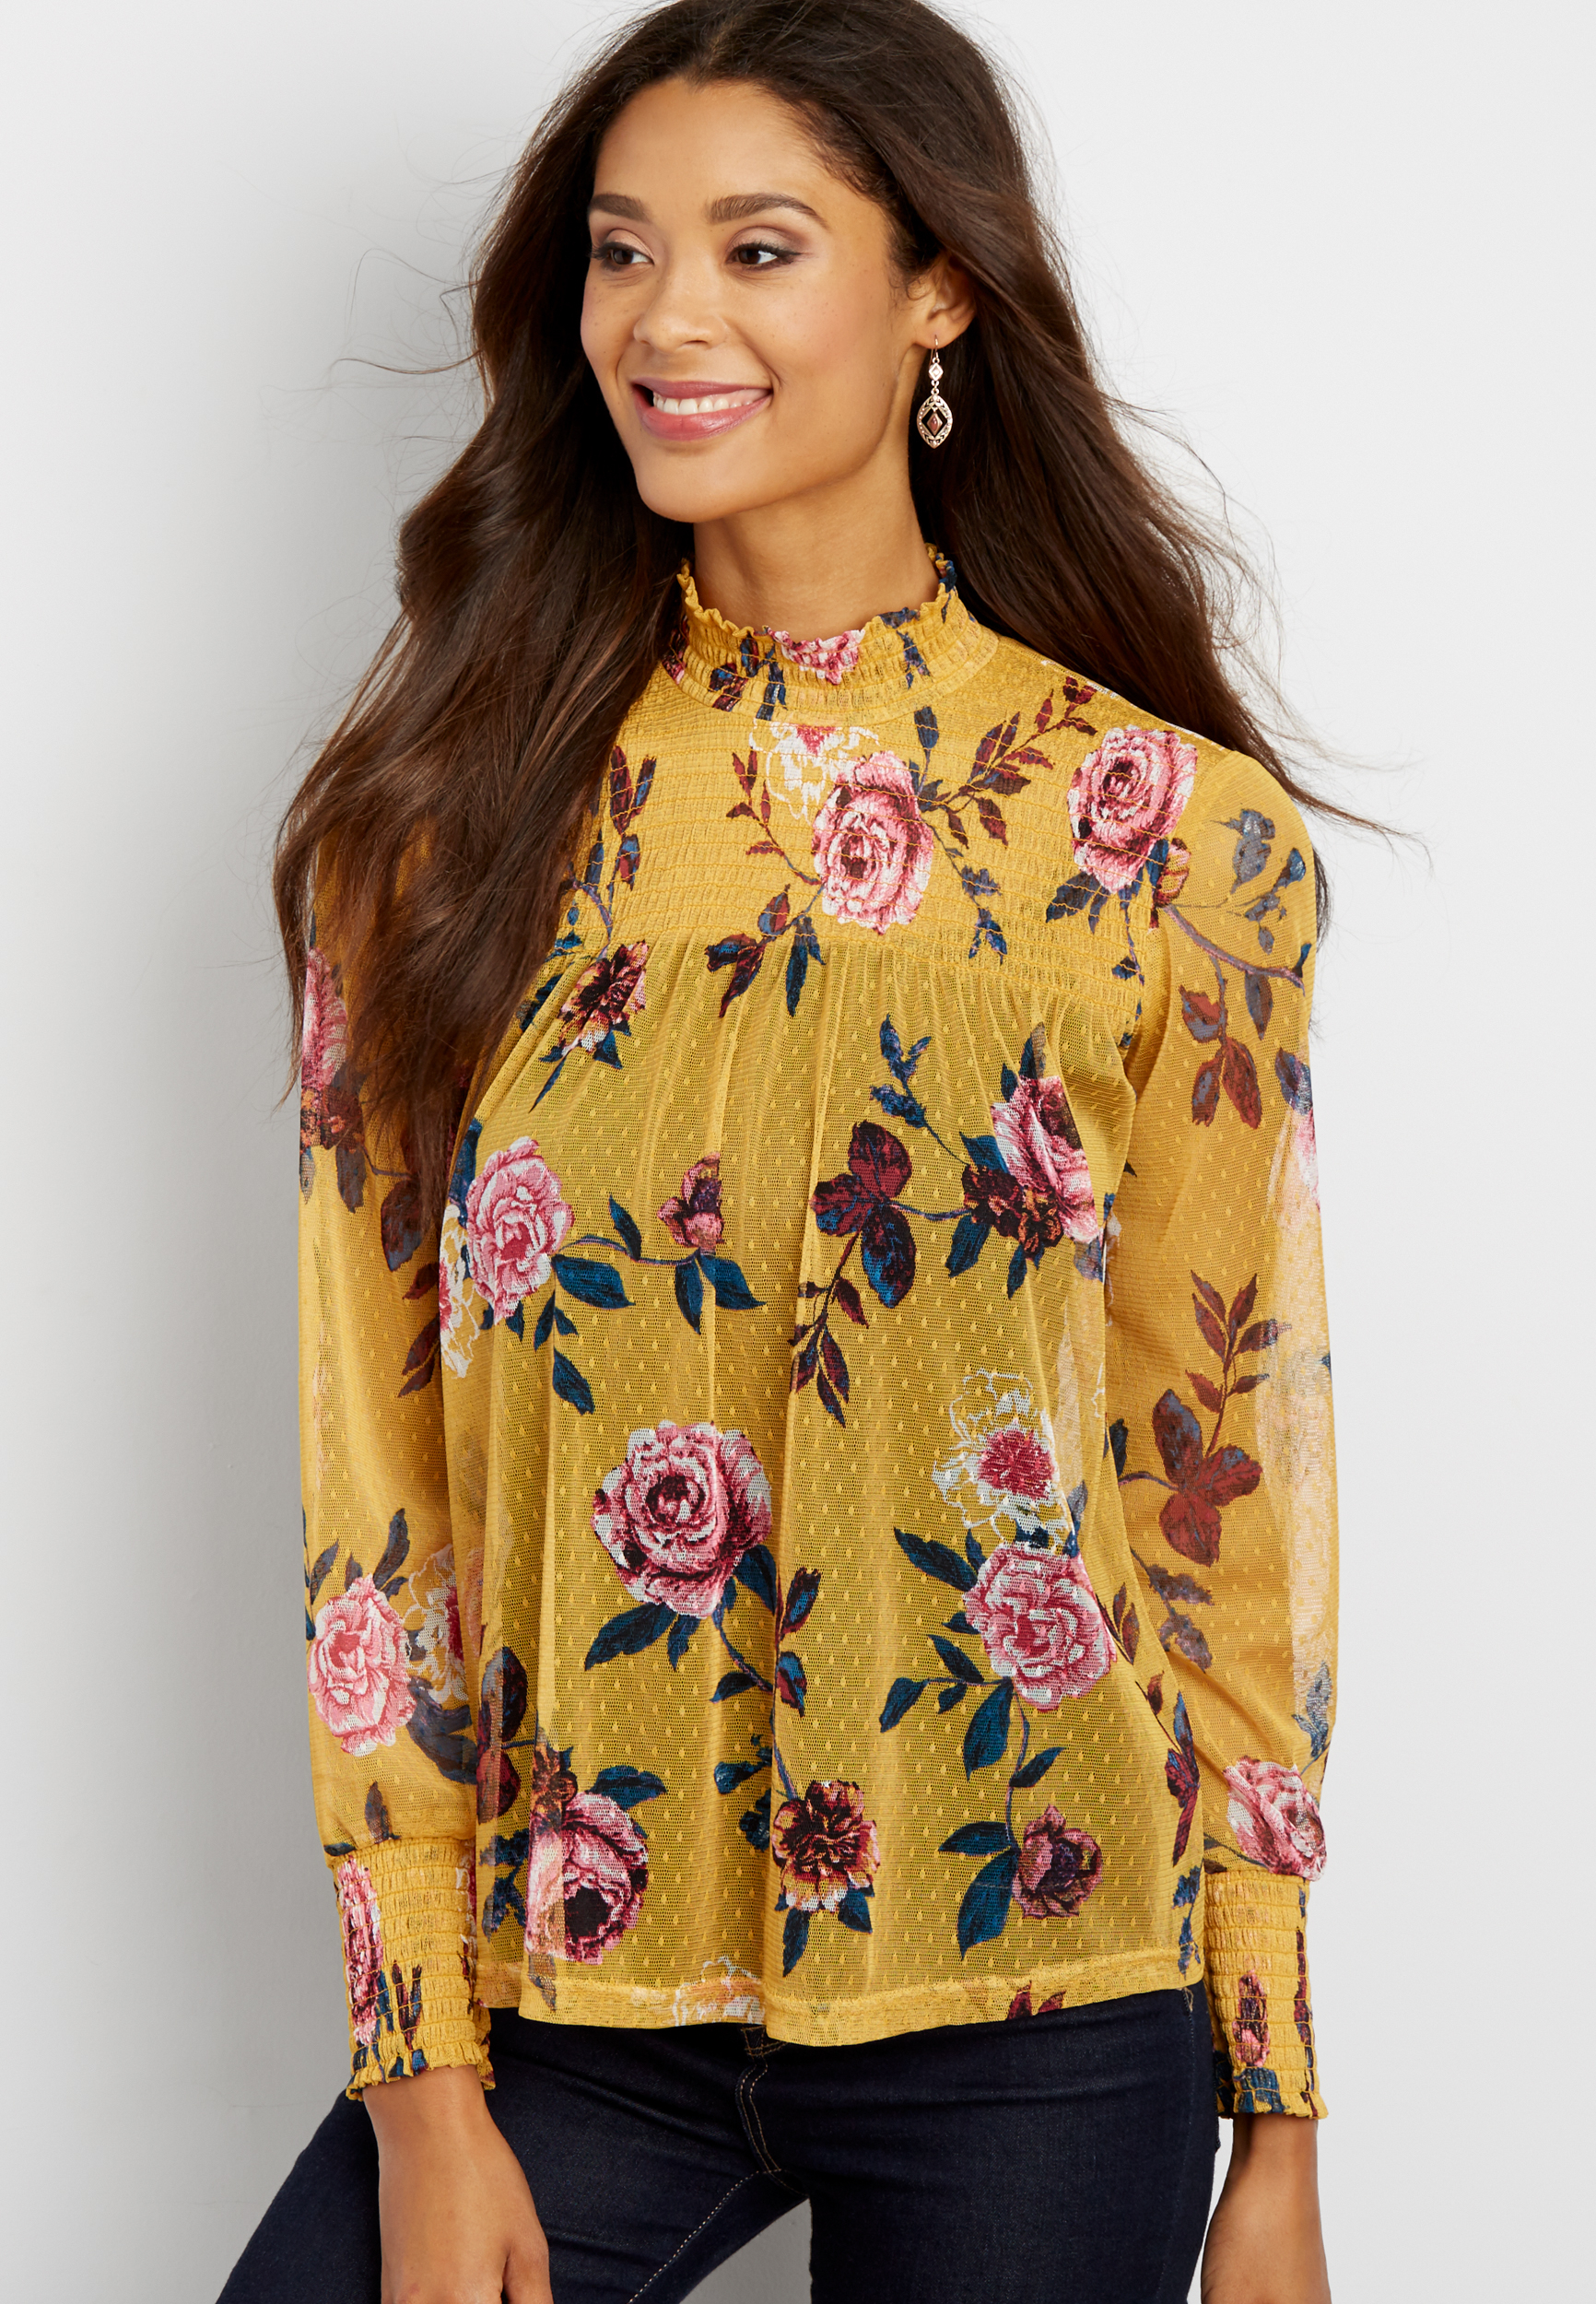 mesh top with smocking in floral print | maurices